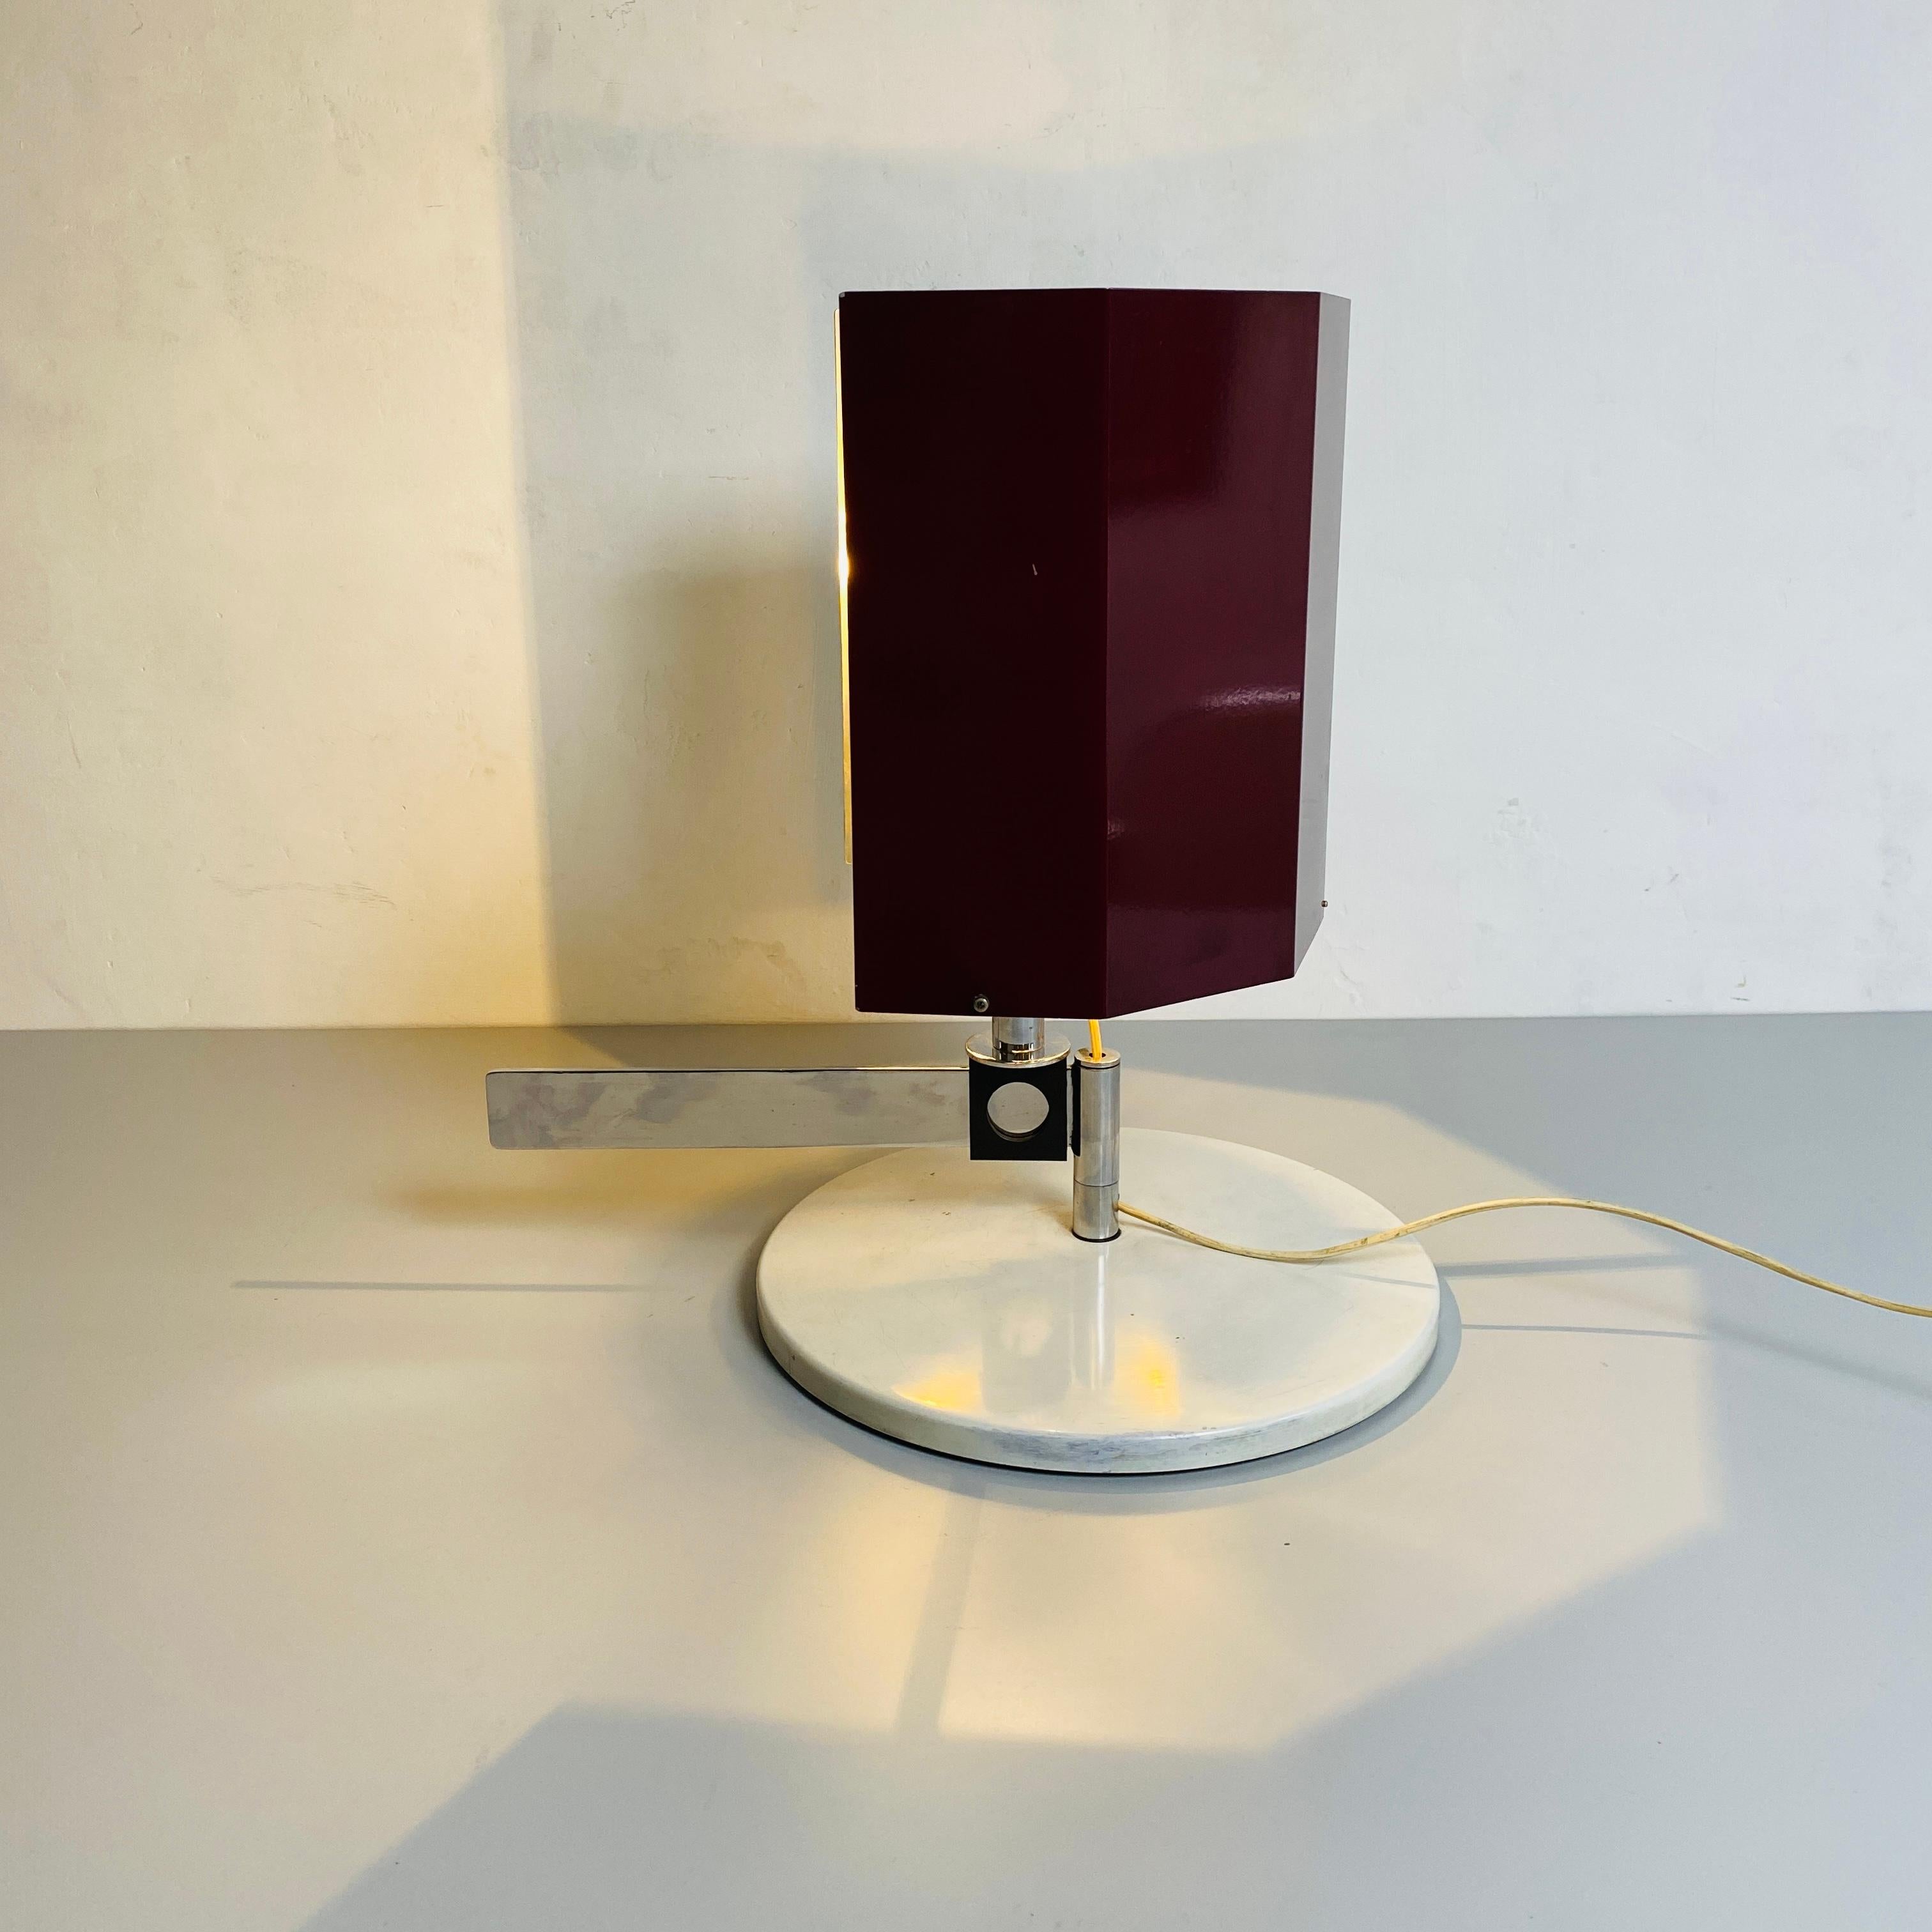 Mid-20th Century Italian Bauhaus Metal Table Lamp by Carl Jacob Jucker for Imago DP, 1960s For Sale